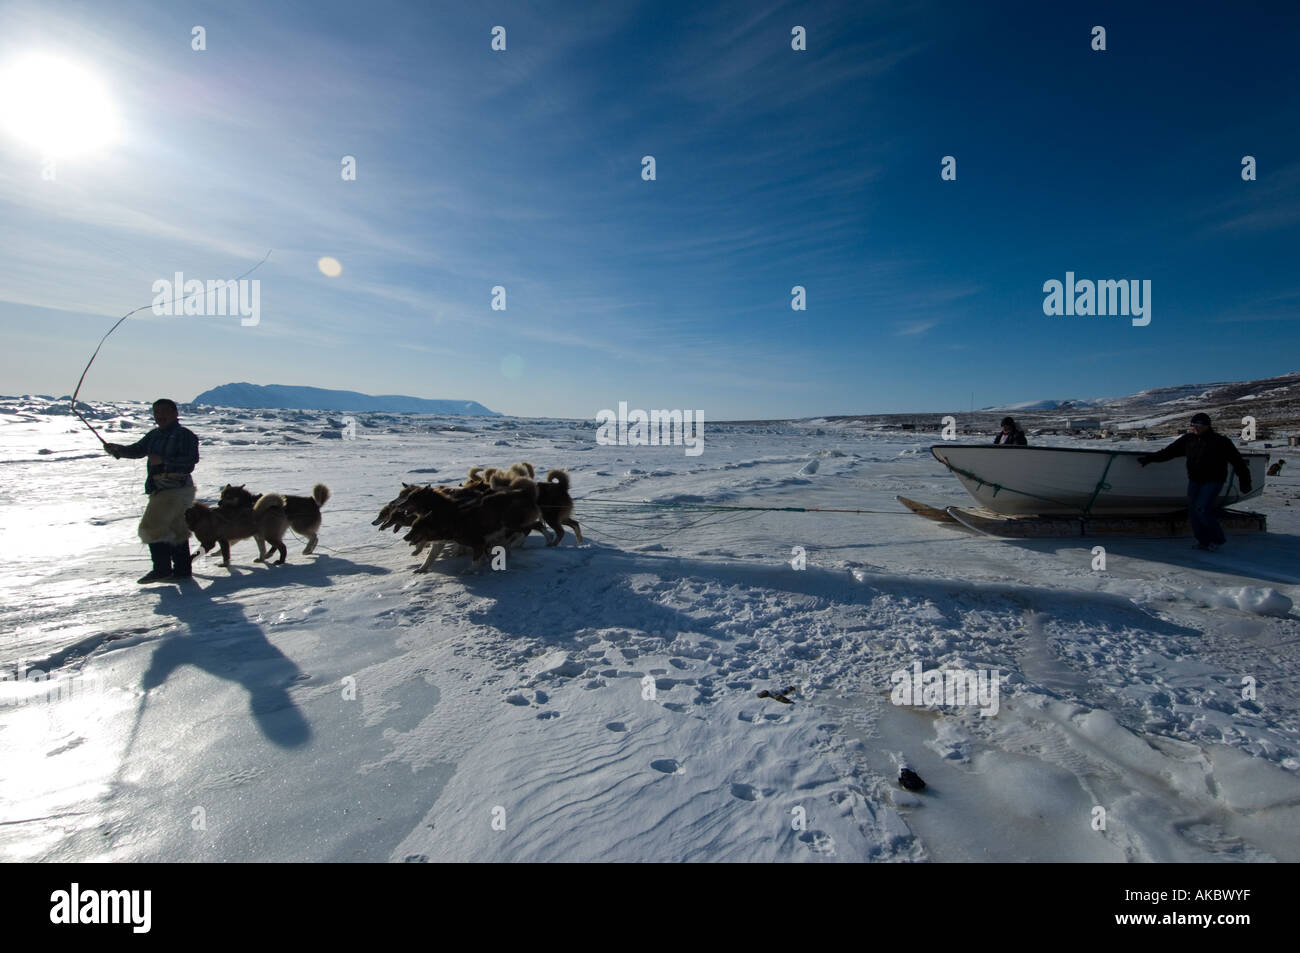 Qaanaaq Greenland  Gideon In spring Inuit hunters travel with a boat on sleds to launch when they reach the floe edge Stock Photo